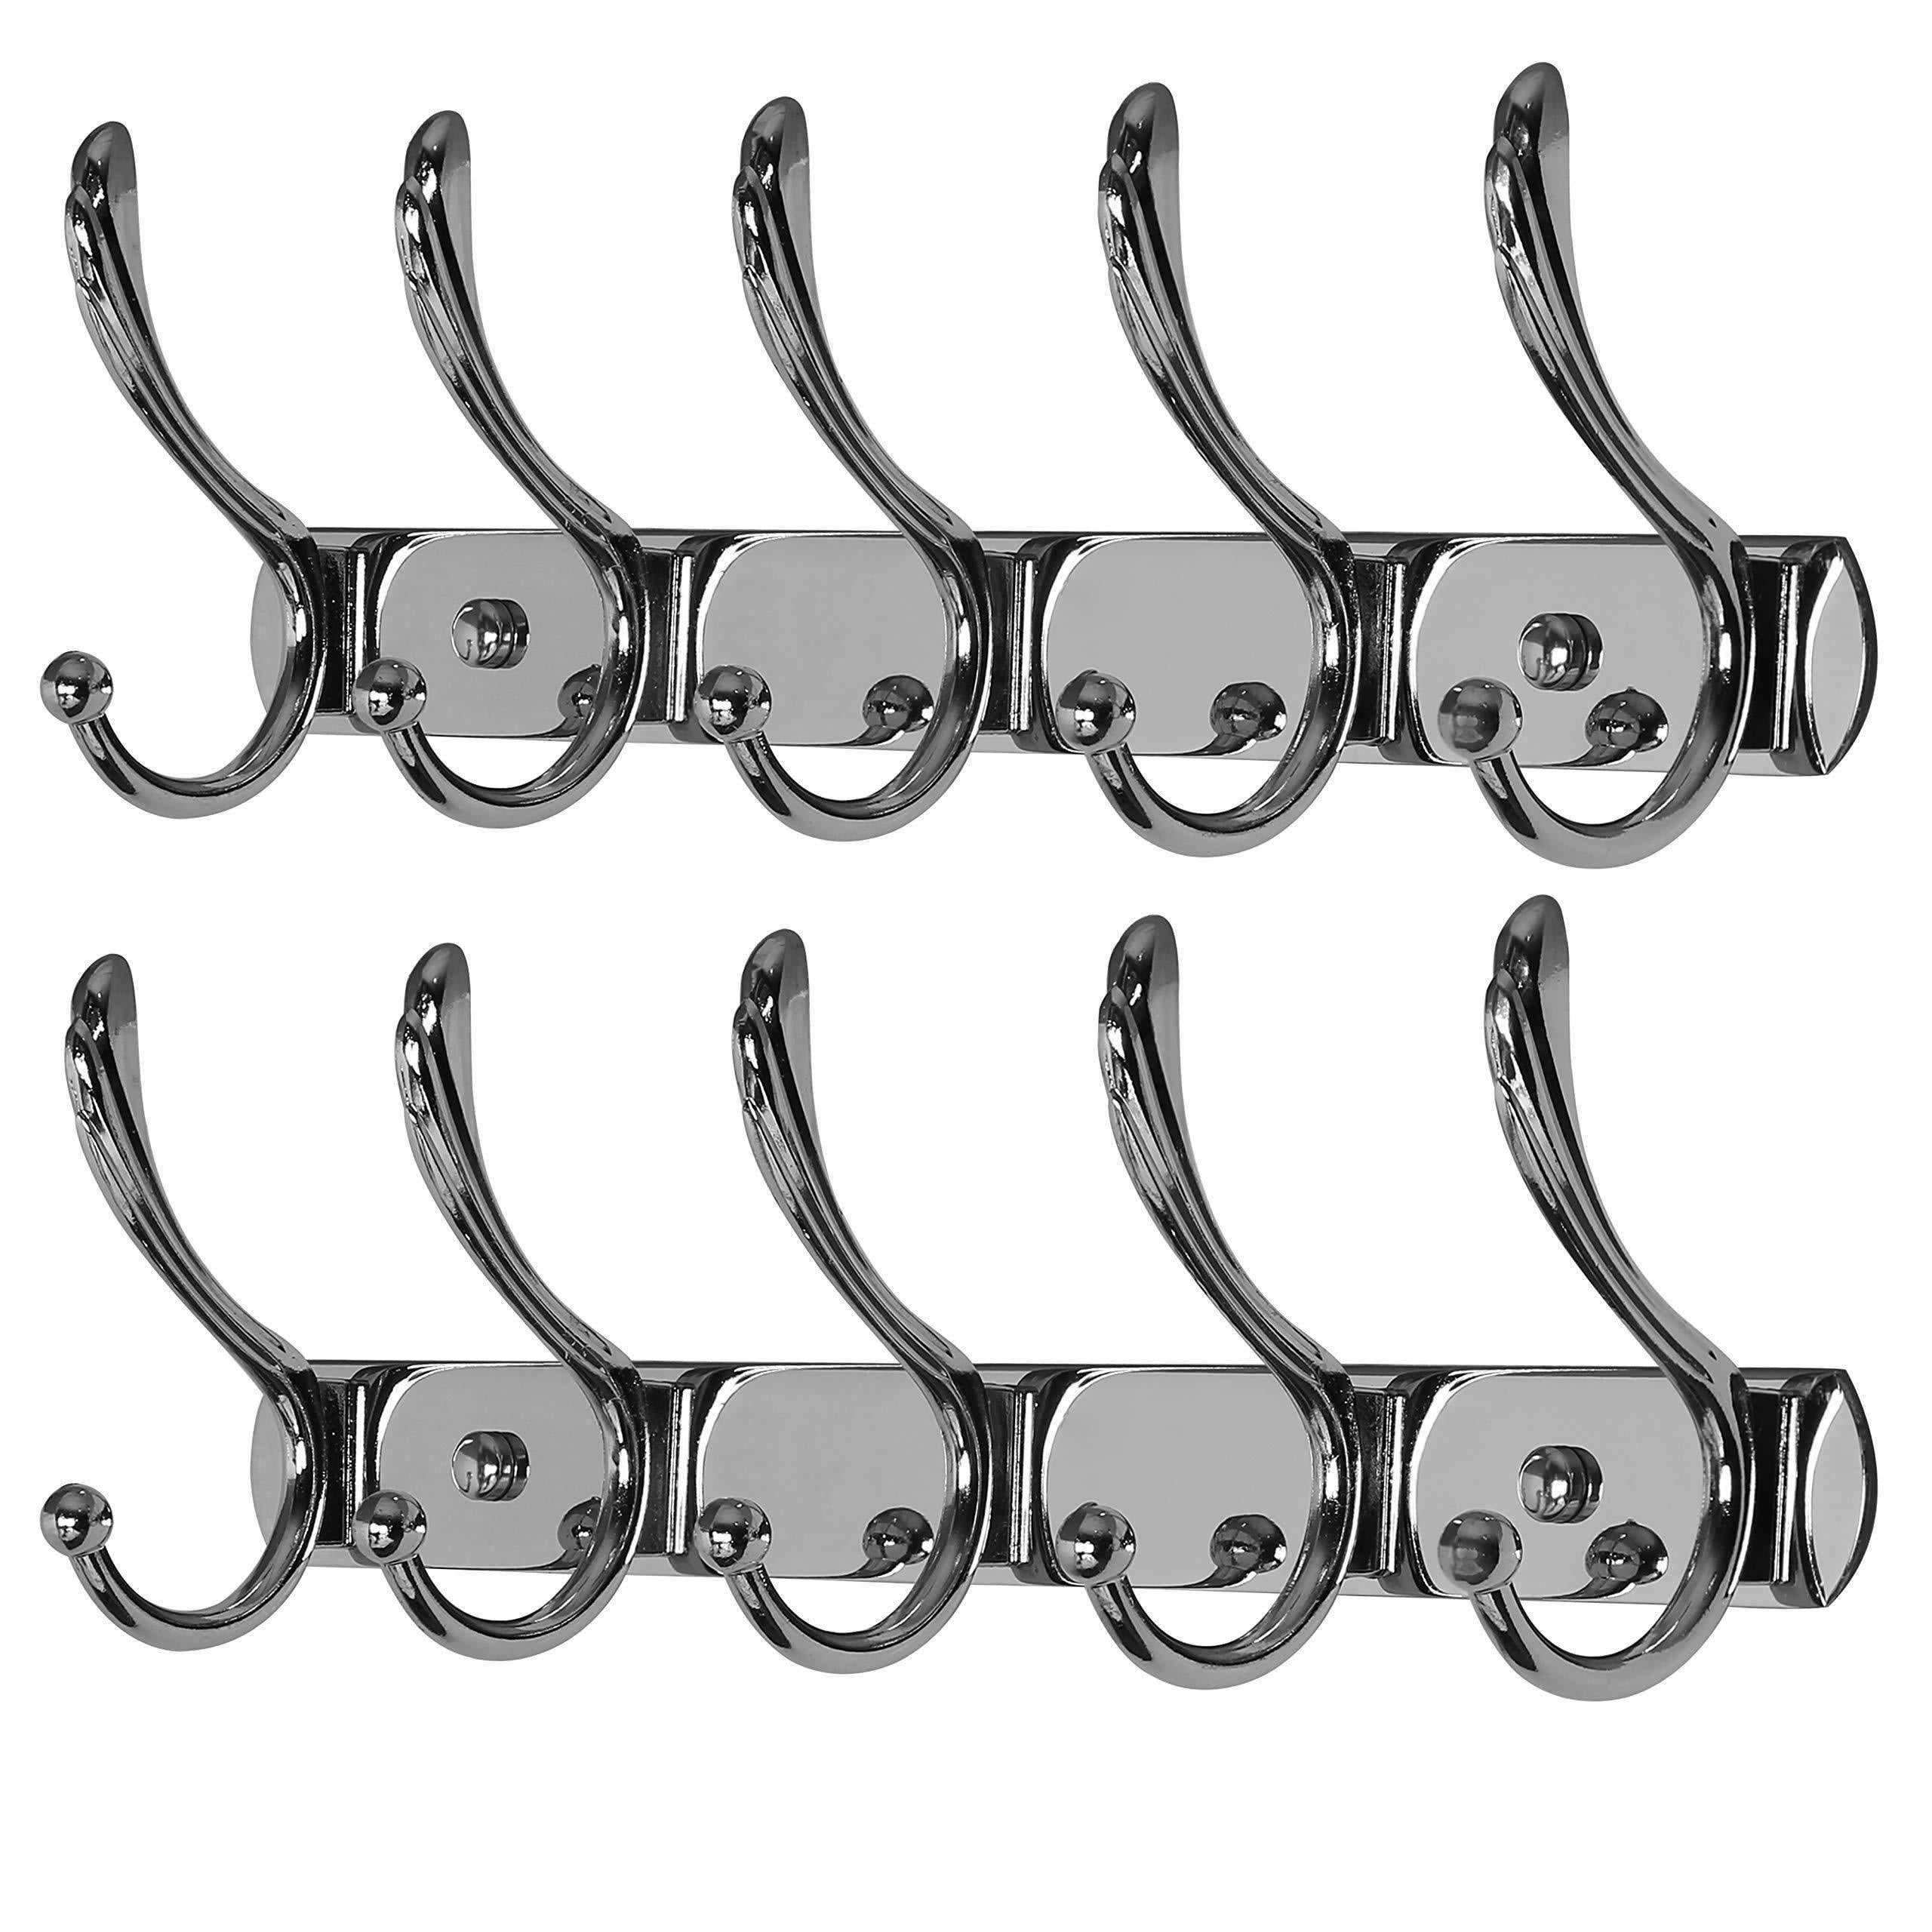 Buy now dseap coat rack wall mounted with 5 jumbo double hooks heavy duty stainless steel metal coat hook hanging clothes towel hat robes for mudroom bathroom entryway chromed 2 packs